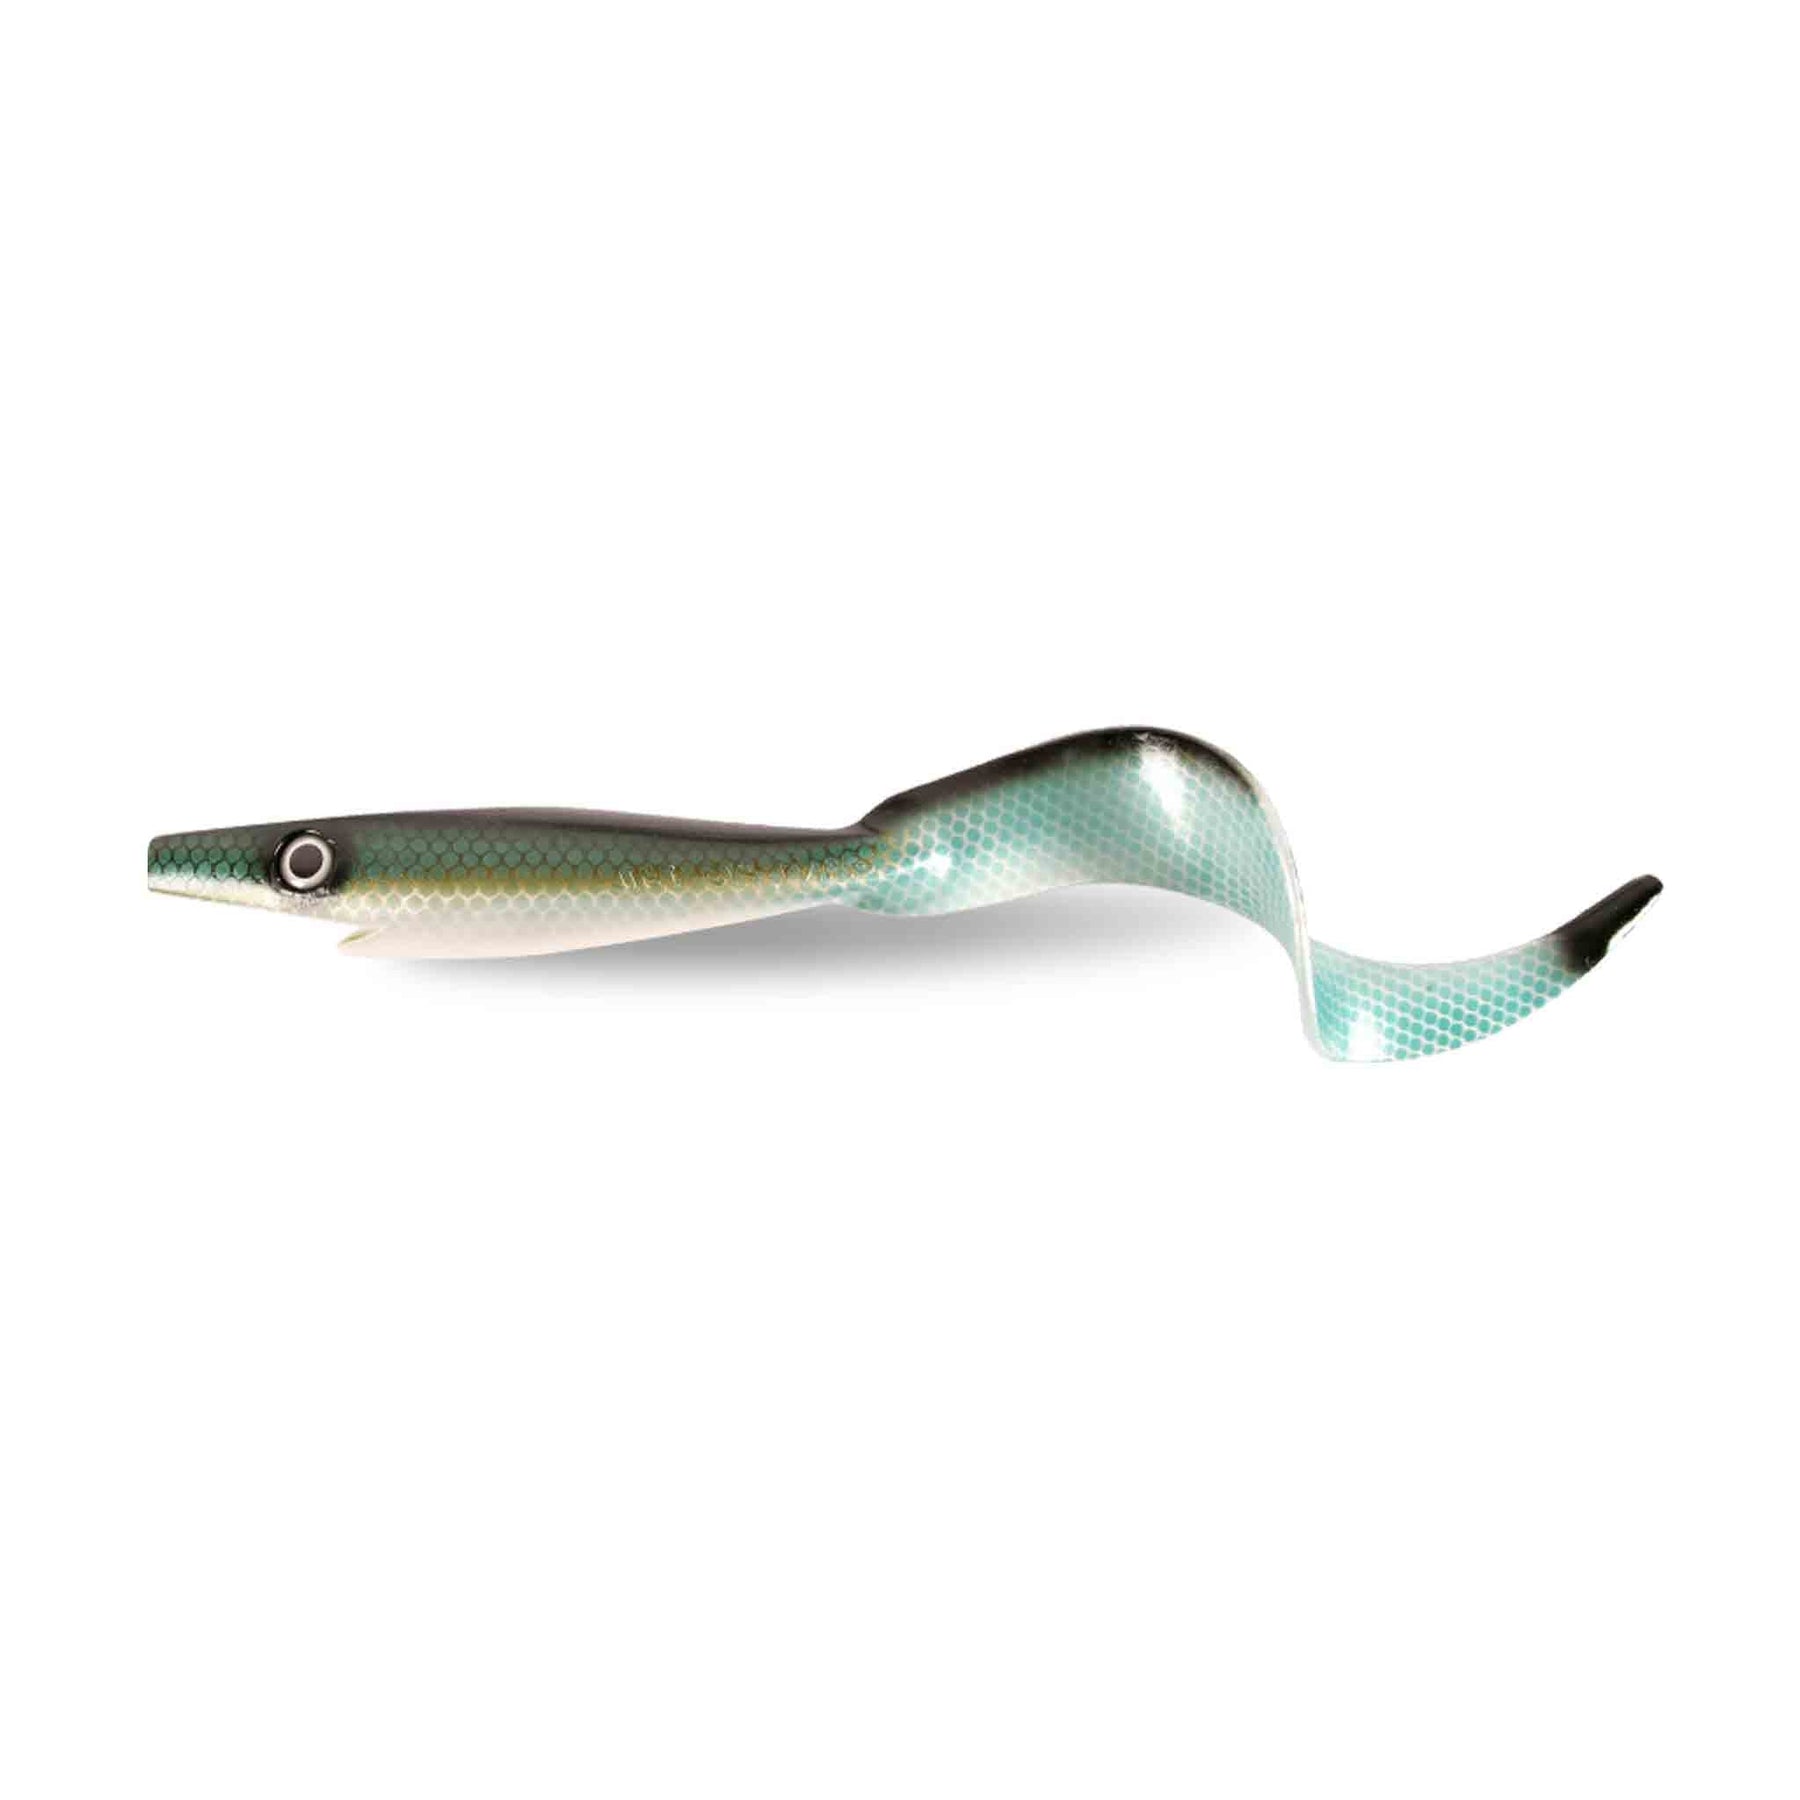 View of Swimbaits Strike Pro Giant Pig Tail Swimbait Baltic Herring available at EZOKO Pike and Musky Shop